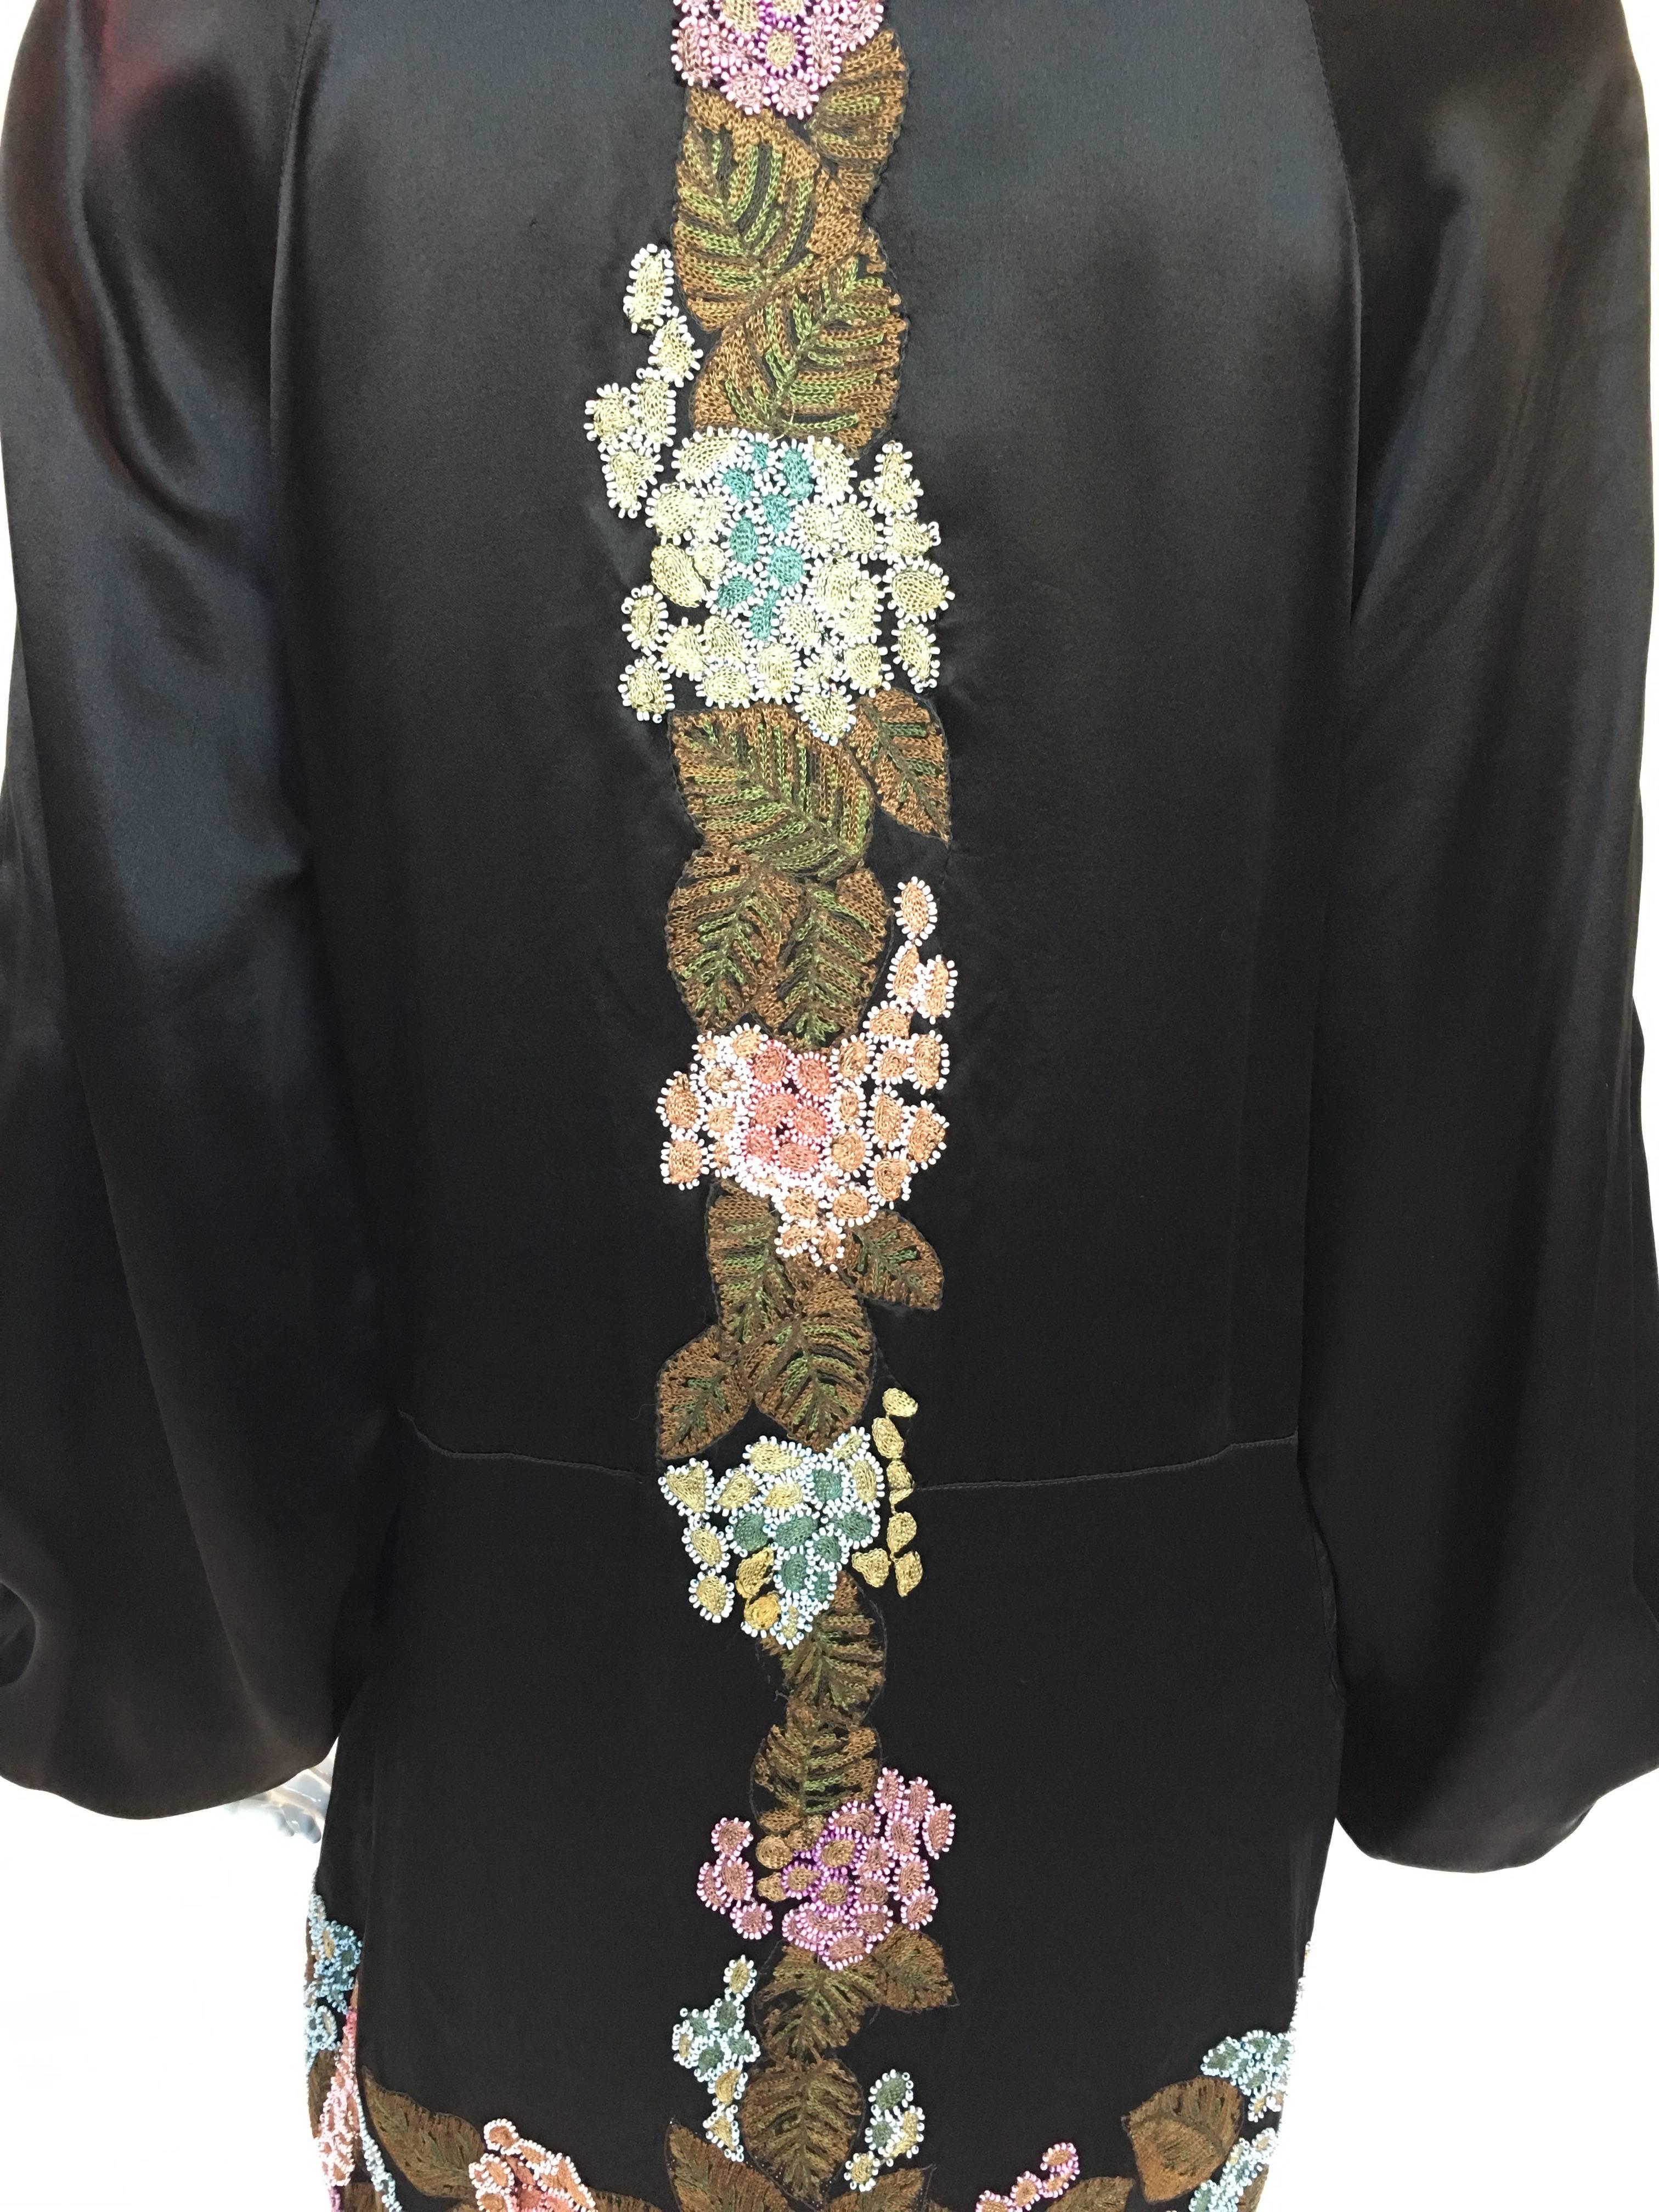 Handmade Black Silk Embroidered and Beaded Floral Trim Dress, 1920s 4